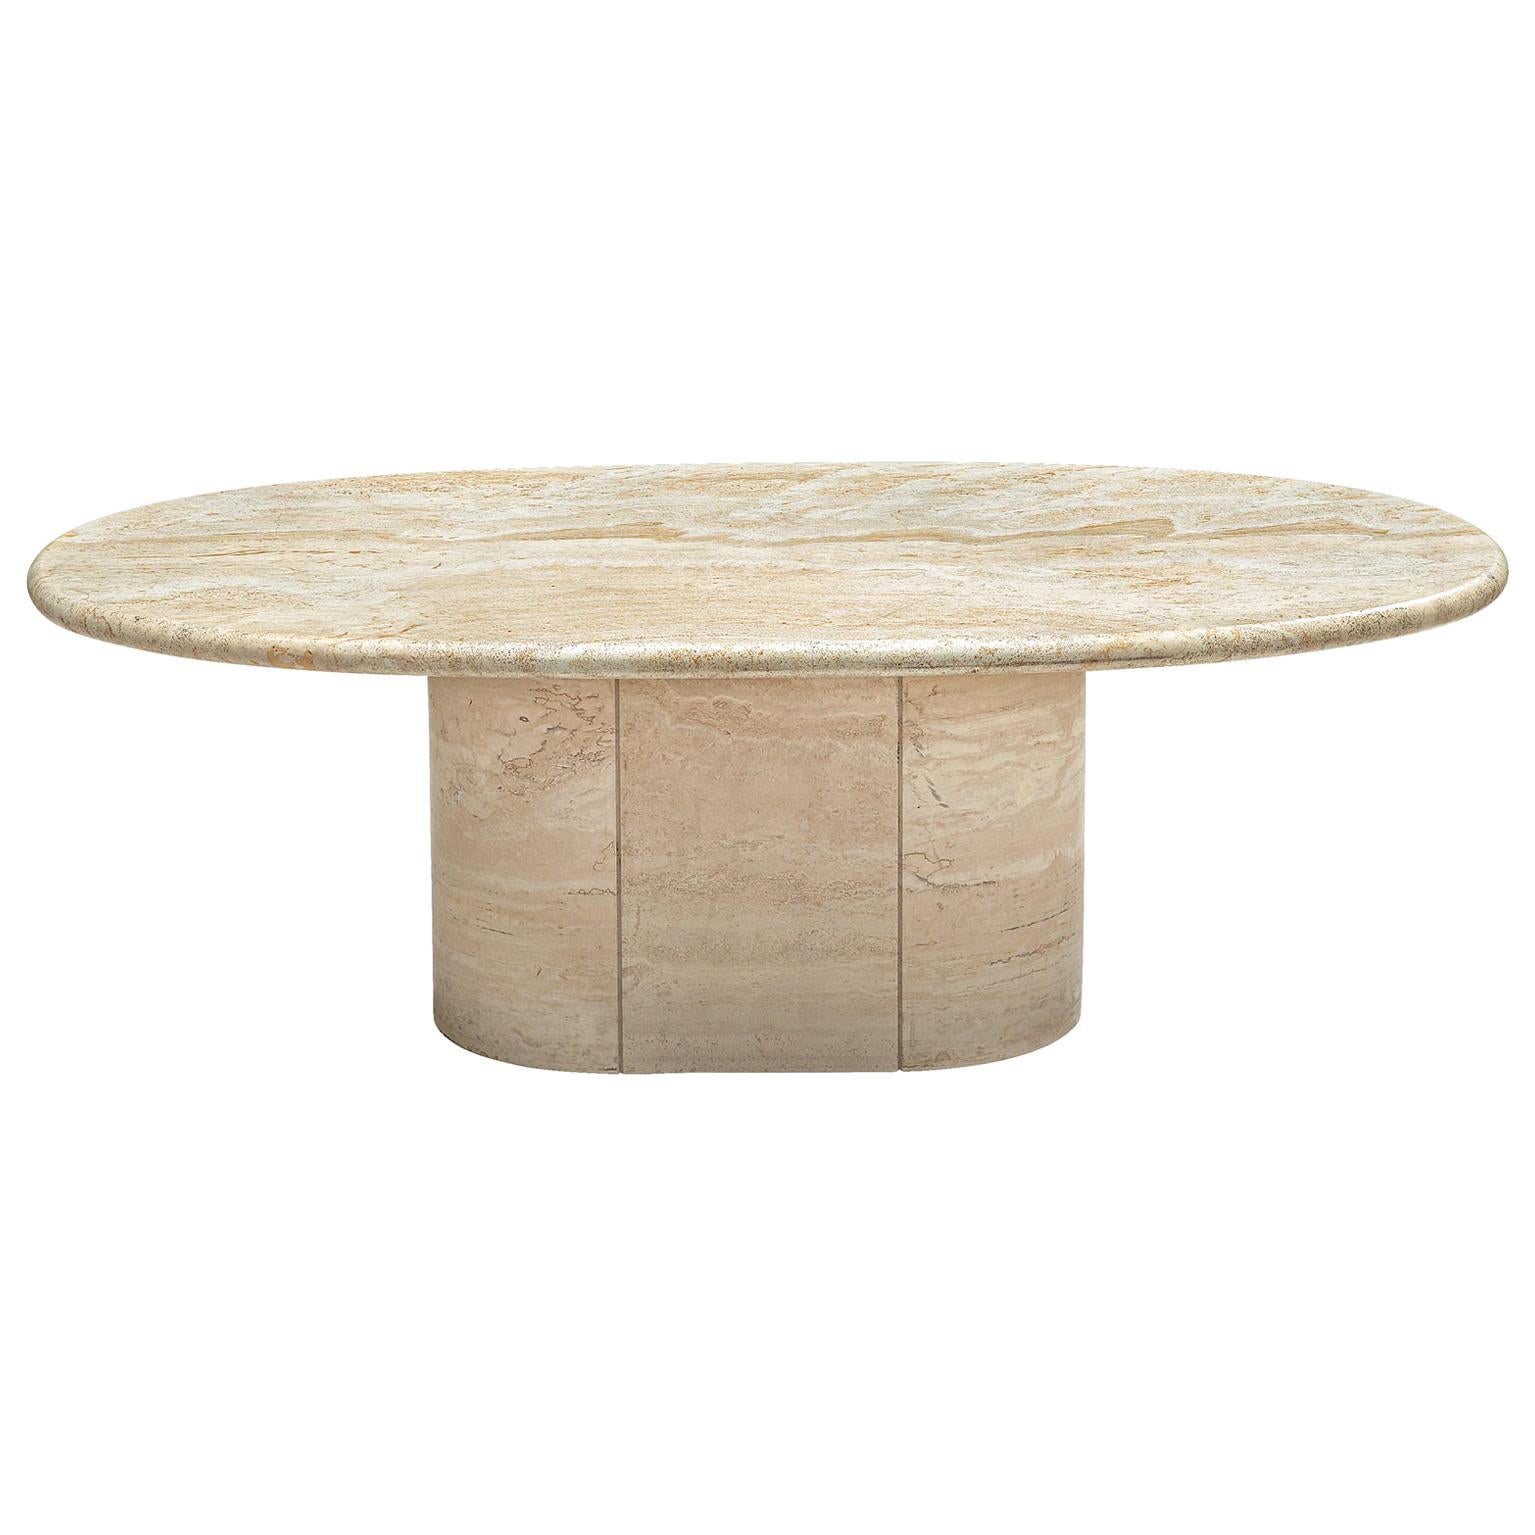 Italian Travertine Coffee Table with Oval Top